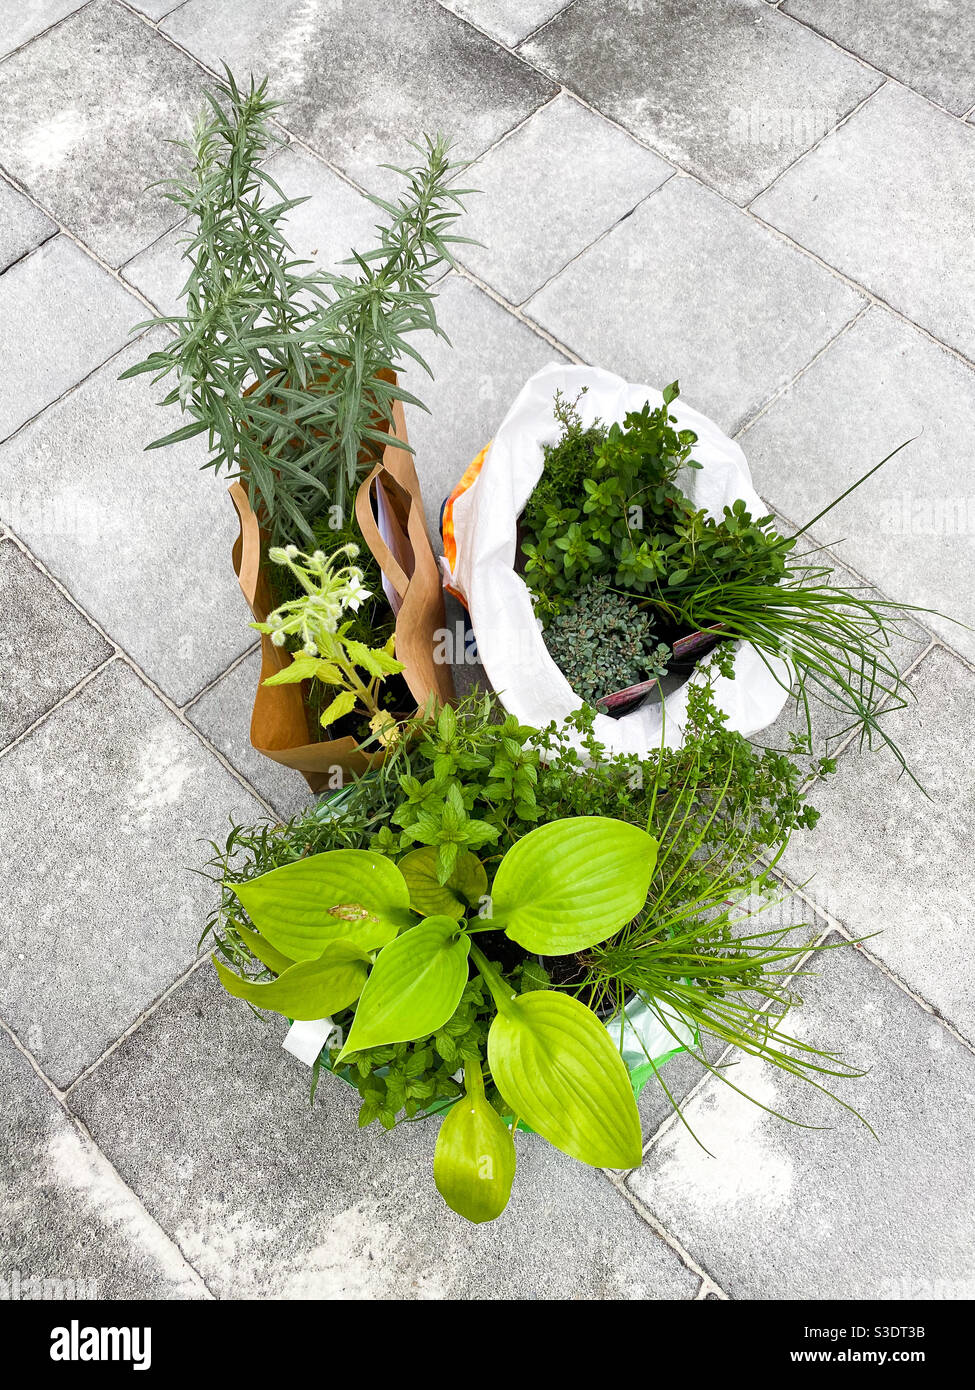 Bunch of green perenial and spice plants in shopping bags on stone surface Stock Photo